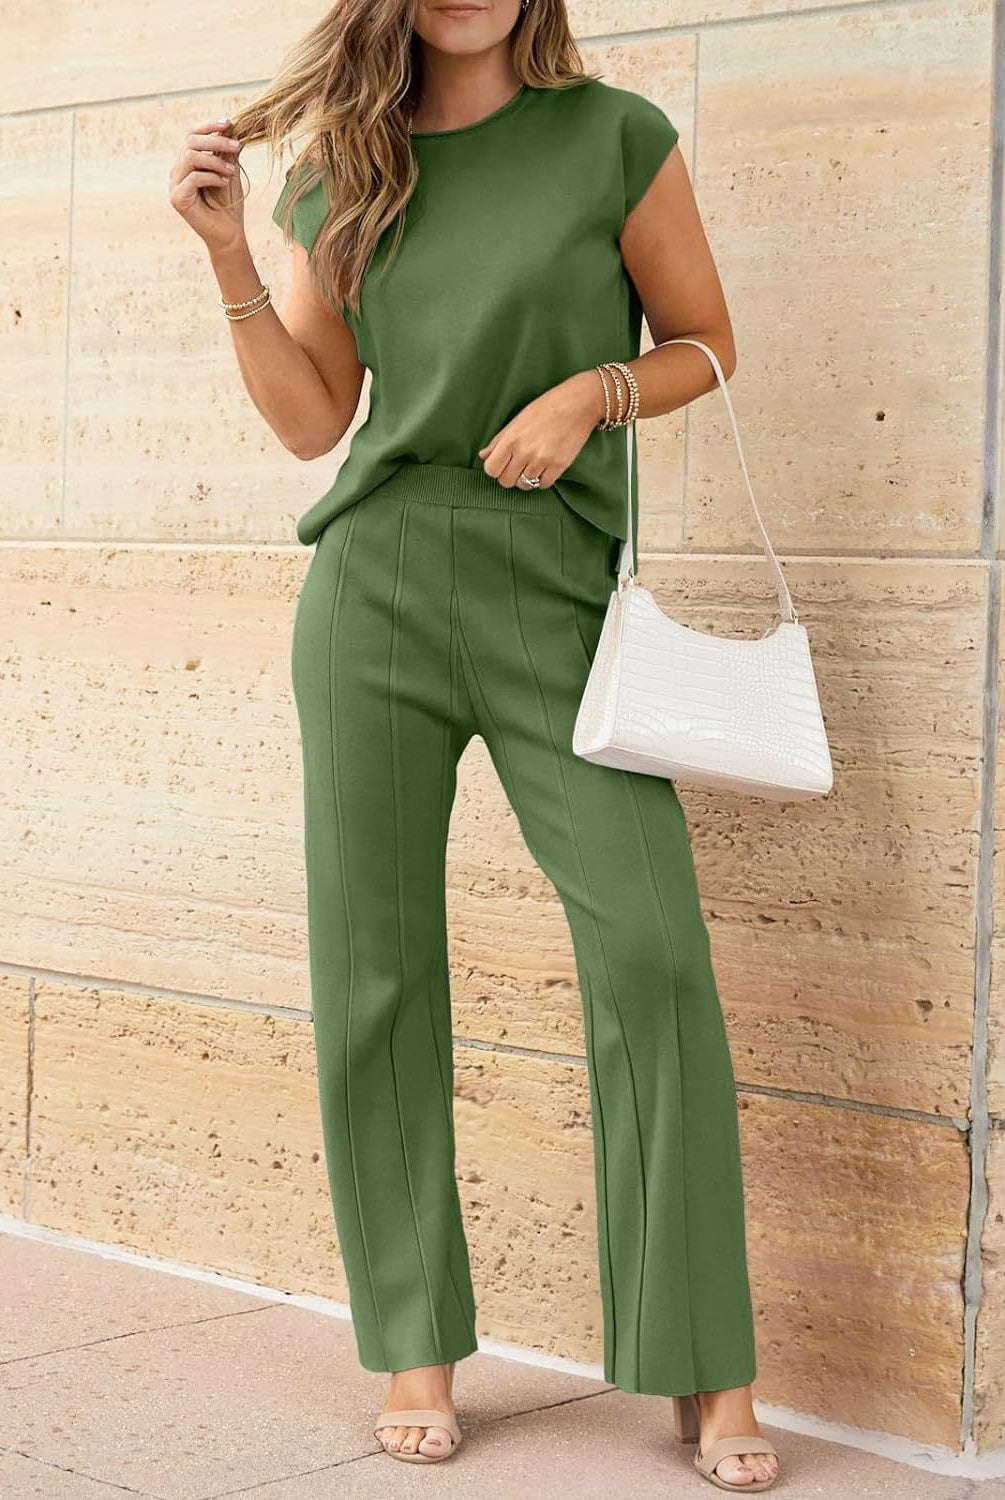 Best of Both Worlds Top and Pants Knit Set-2 Piece Outfit Sets-Krush Kandy, Women's Online Fashion Boutique Located in Phoenix, Arizona (Scottsdale Area)